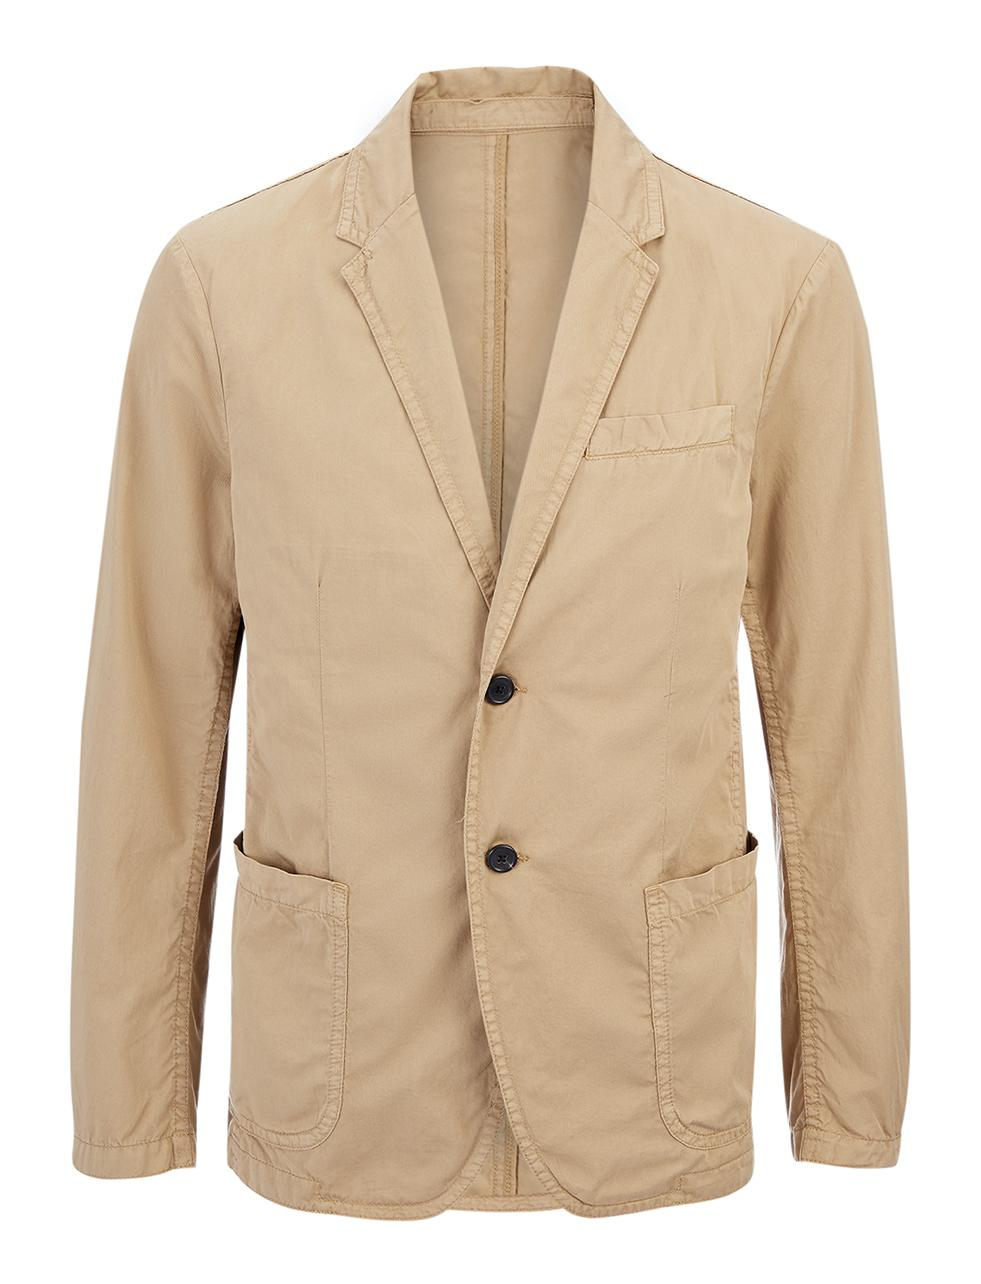 Lyst - Joseph Cotton Chino Venice Shirt Jacket in Brown for Men